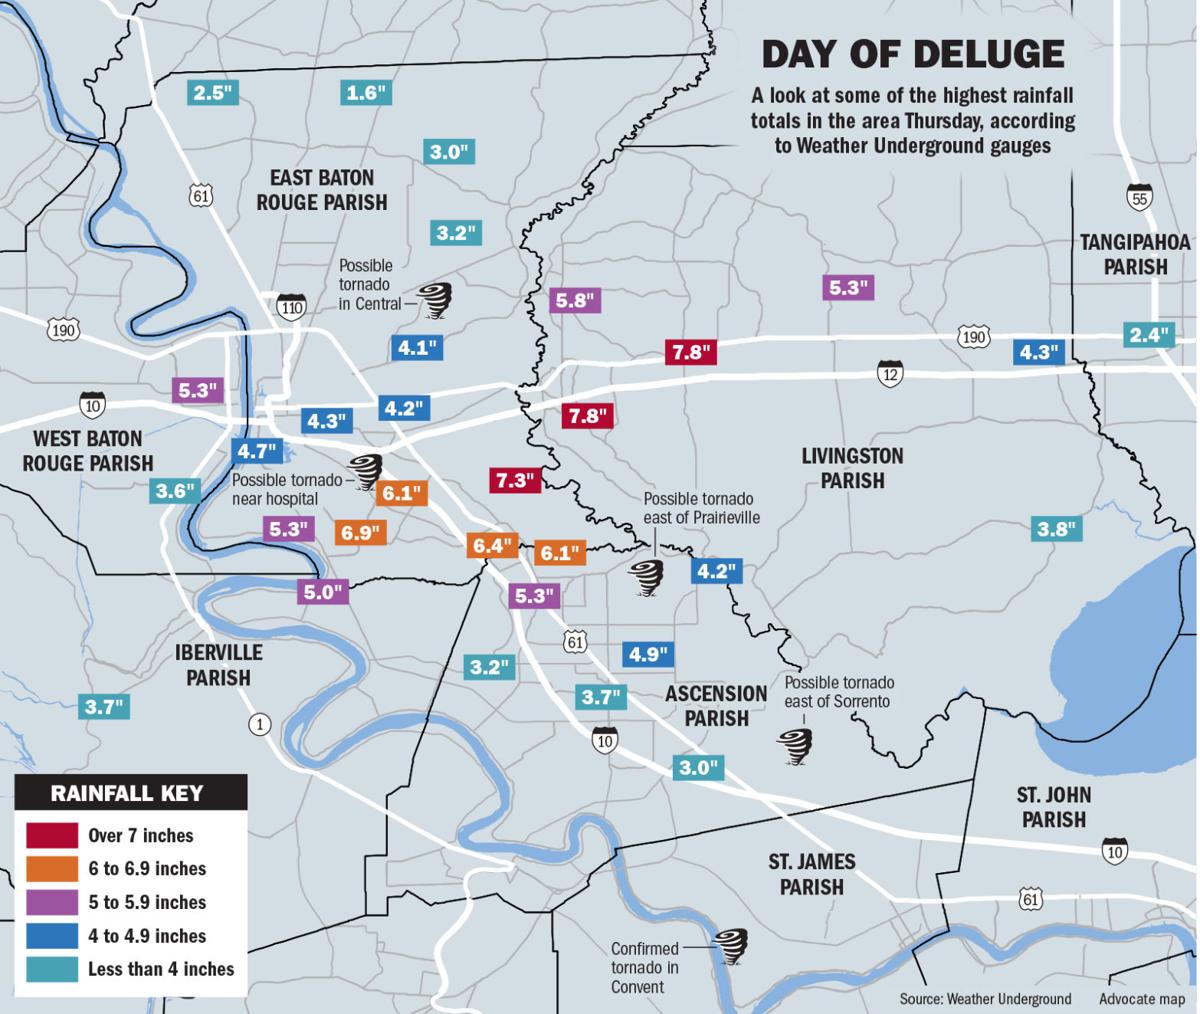 Rainfall totals of 5-7 inches inundate Baton Rouge area and trigger